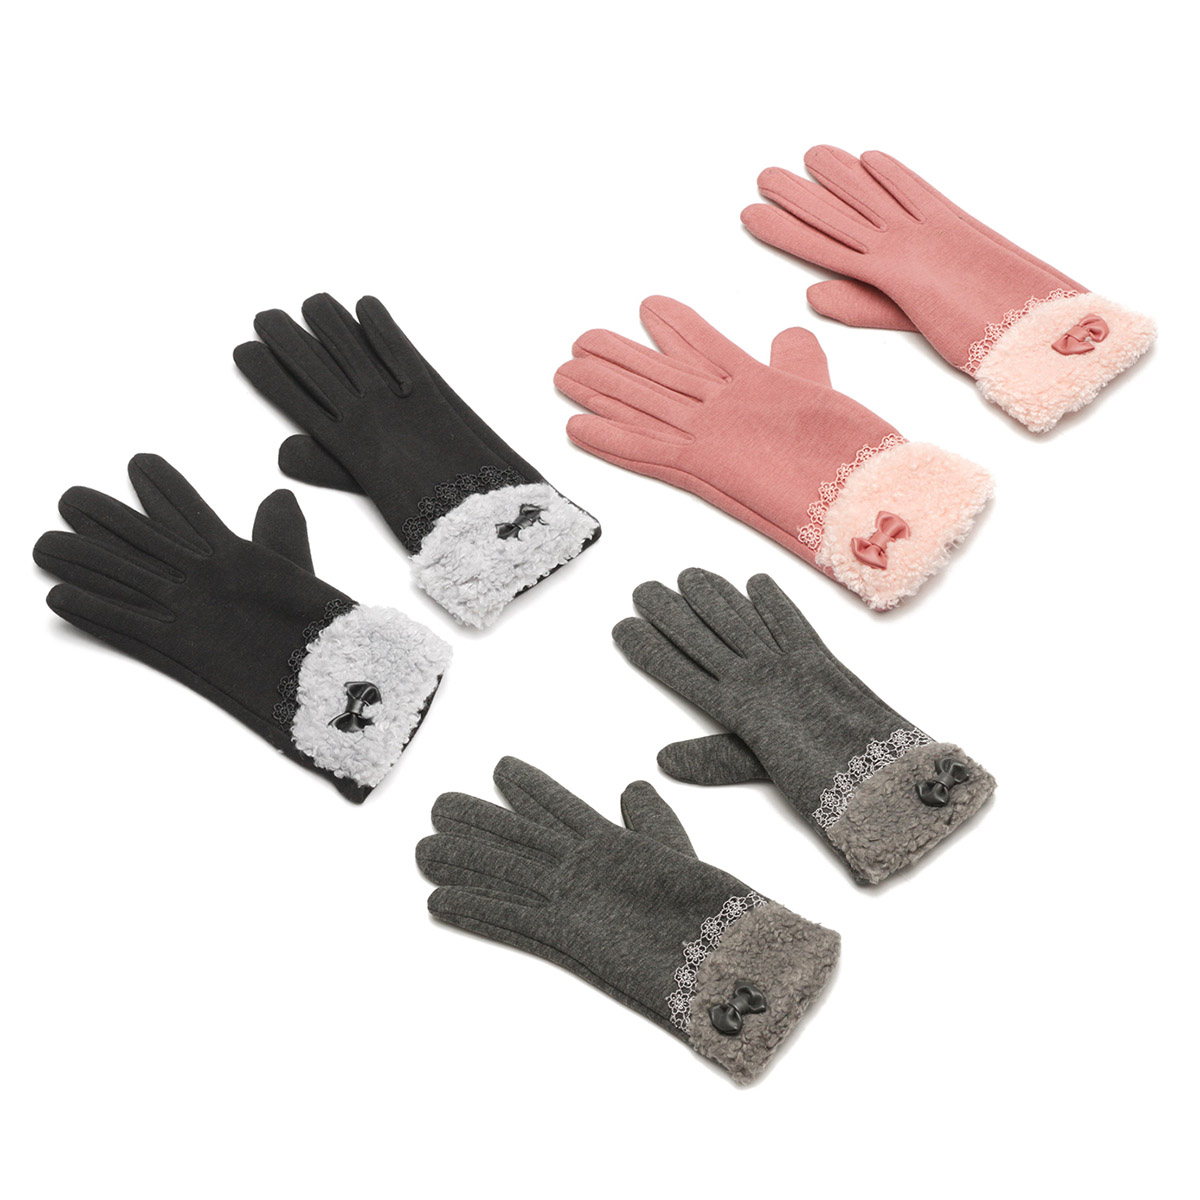 Women-Winter-Gloves-Touch-Screen-Warm-Gloves-Outdoor-Driving-Gloves-For-Smartphone-1095654-5